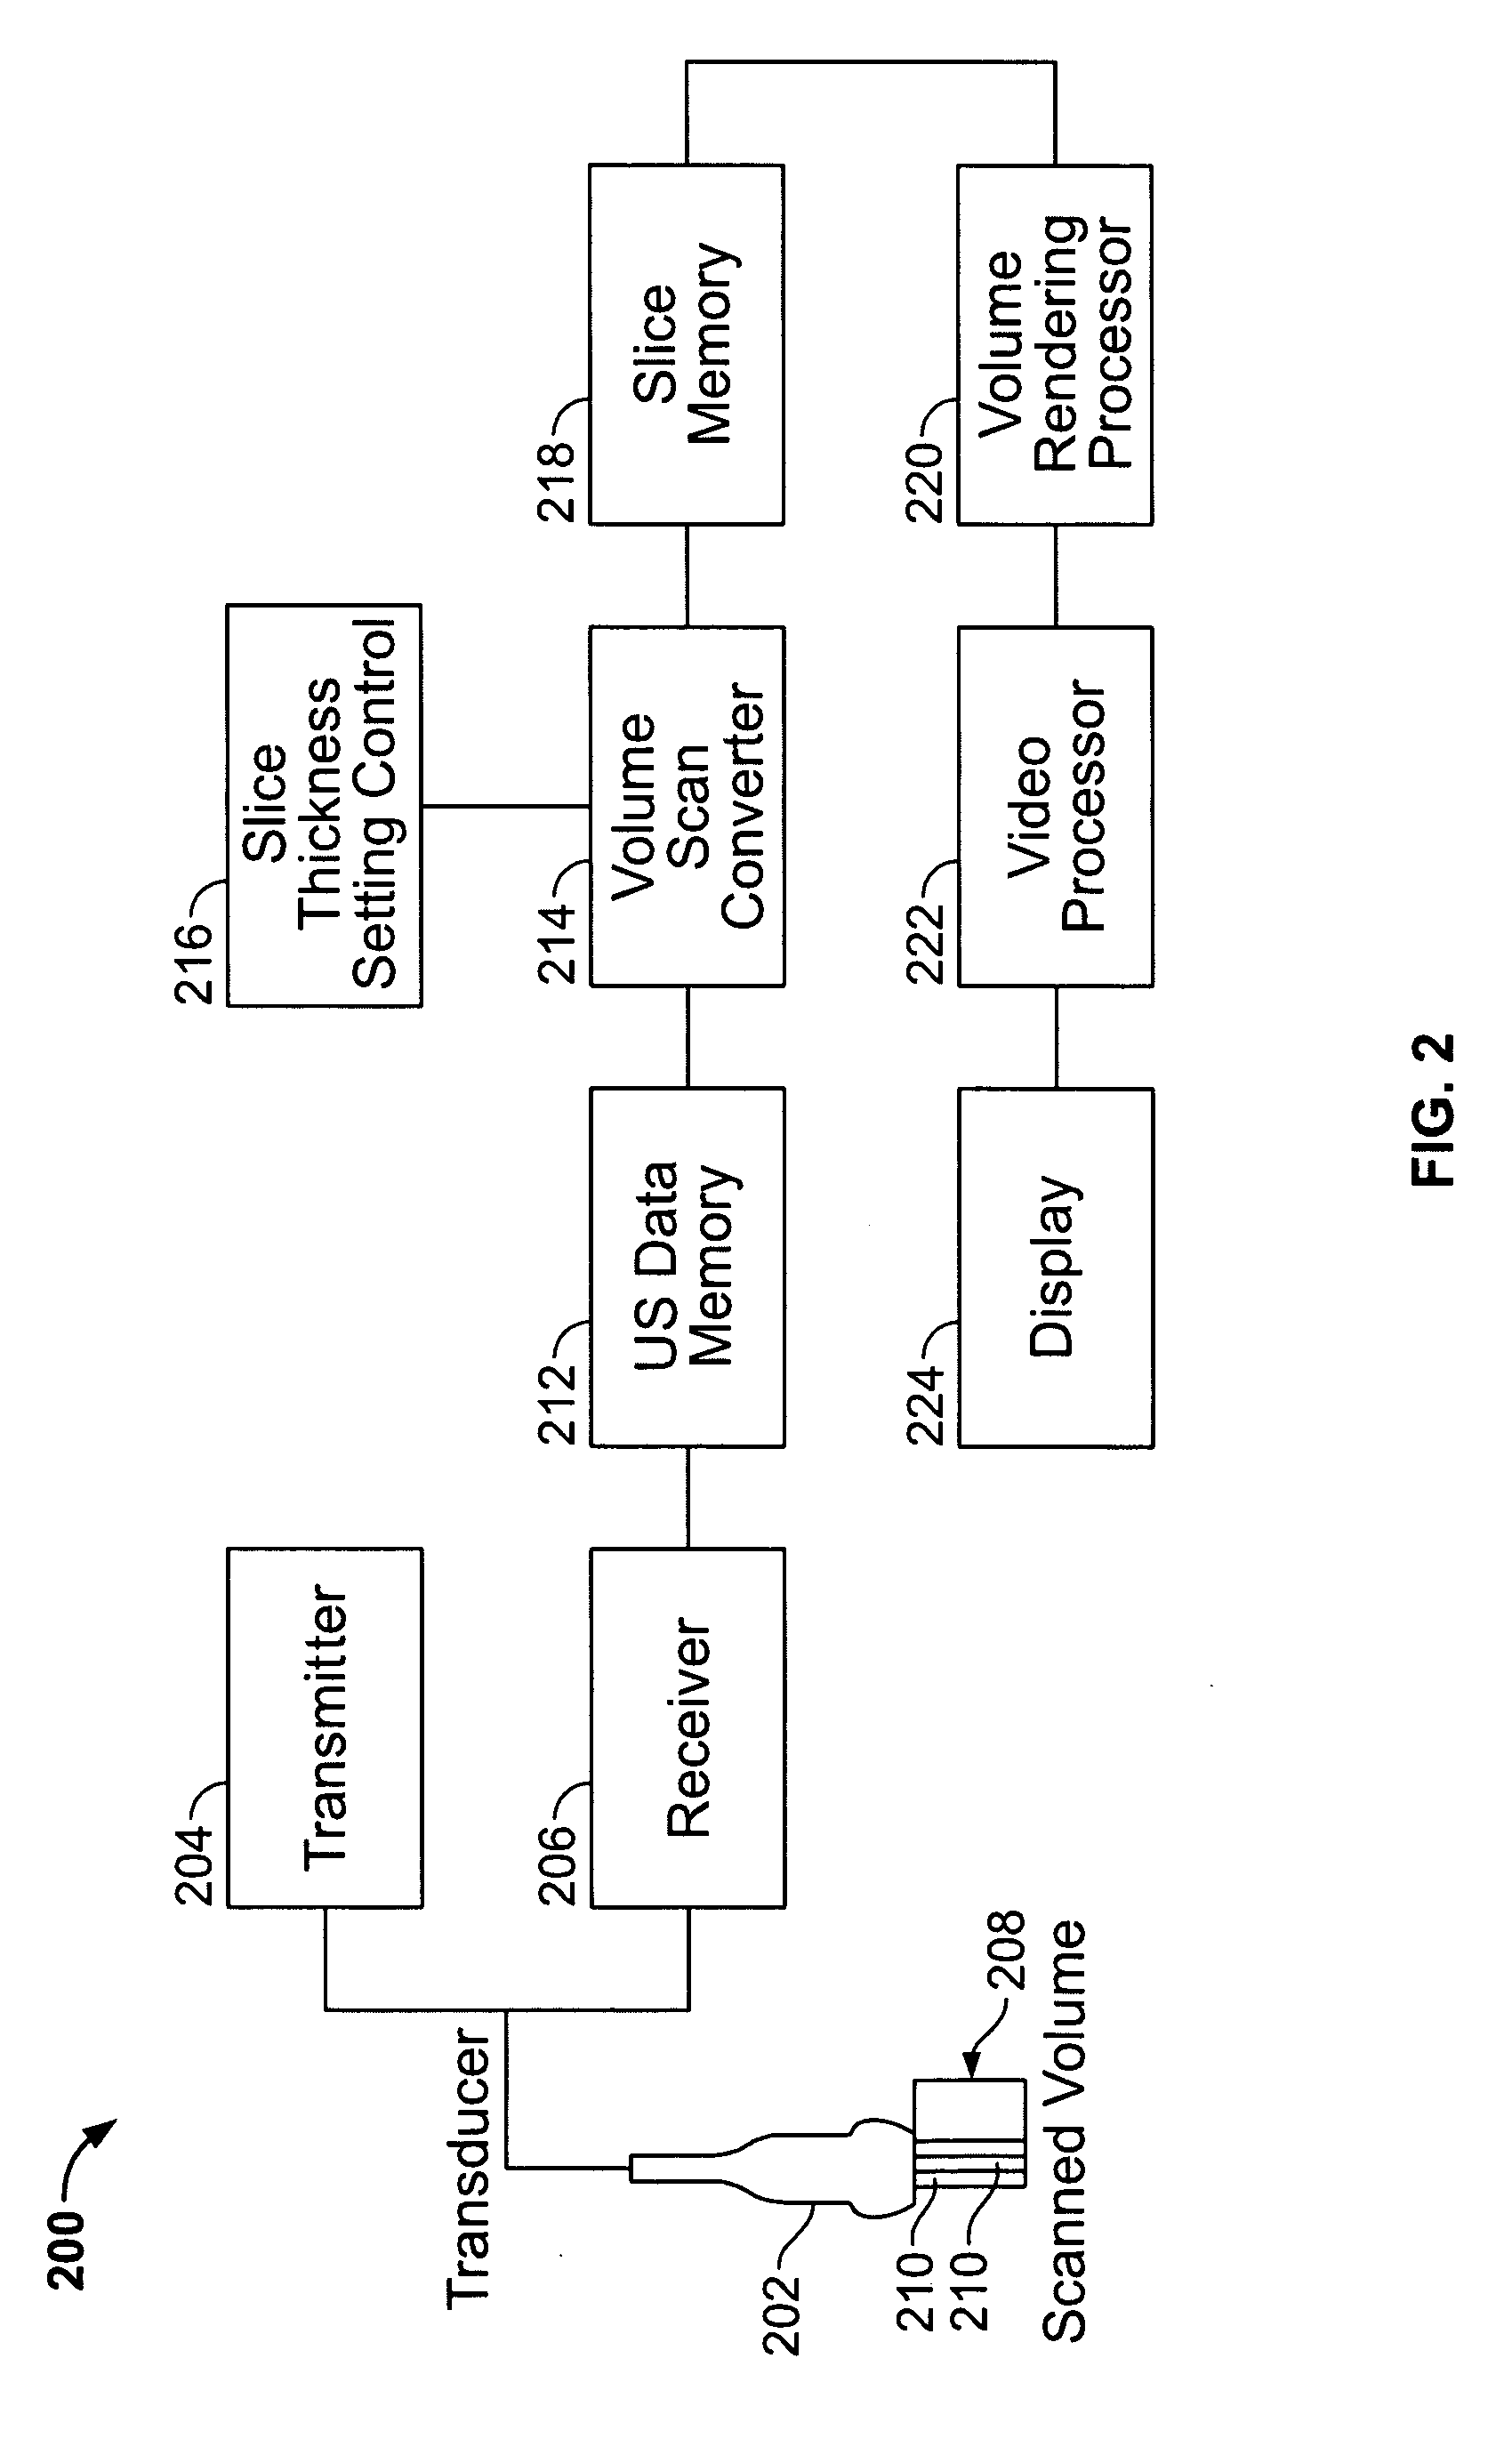 Methods and apparatus for defining a protocol for ultrasound imaging